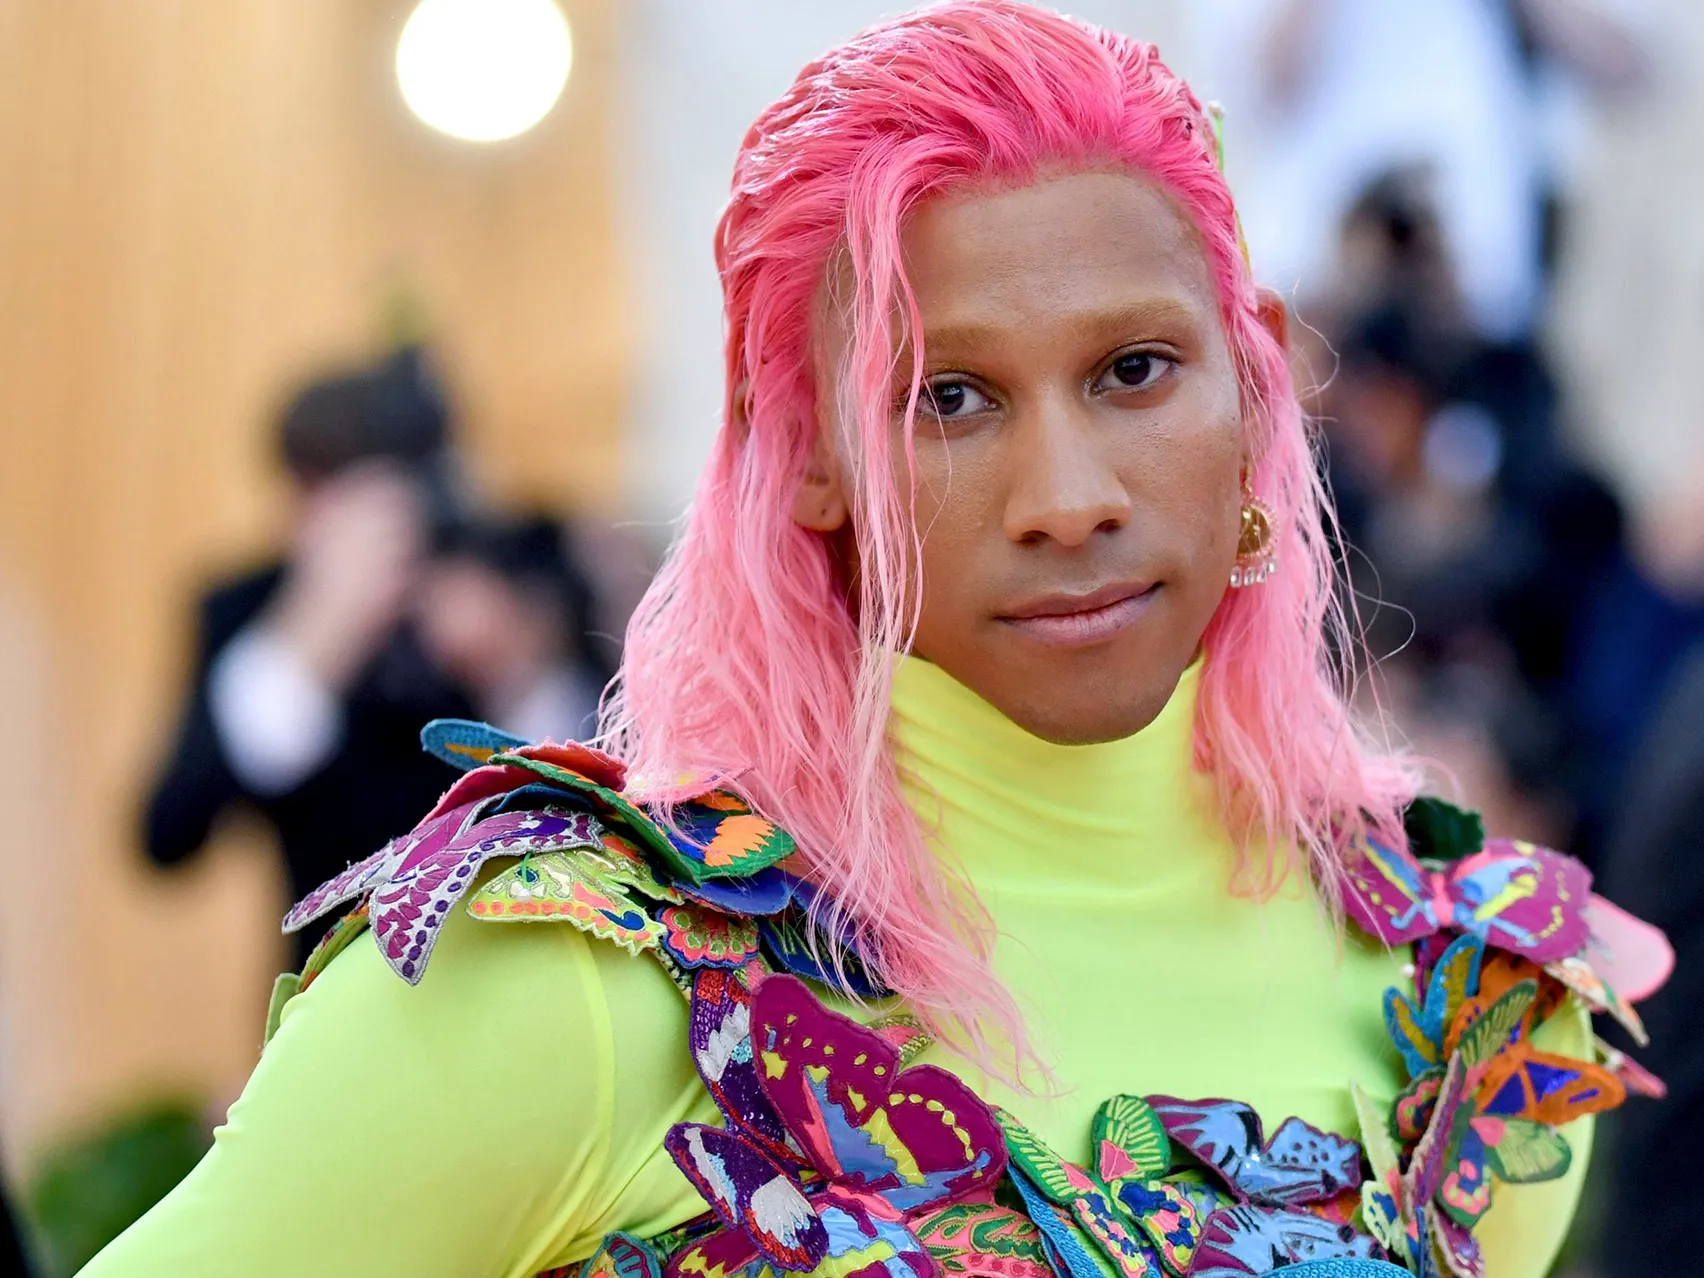 Keiynan Lonsdale: TV Shows, Twitter and lifestyle